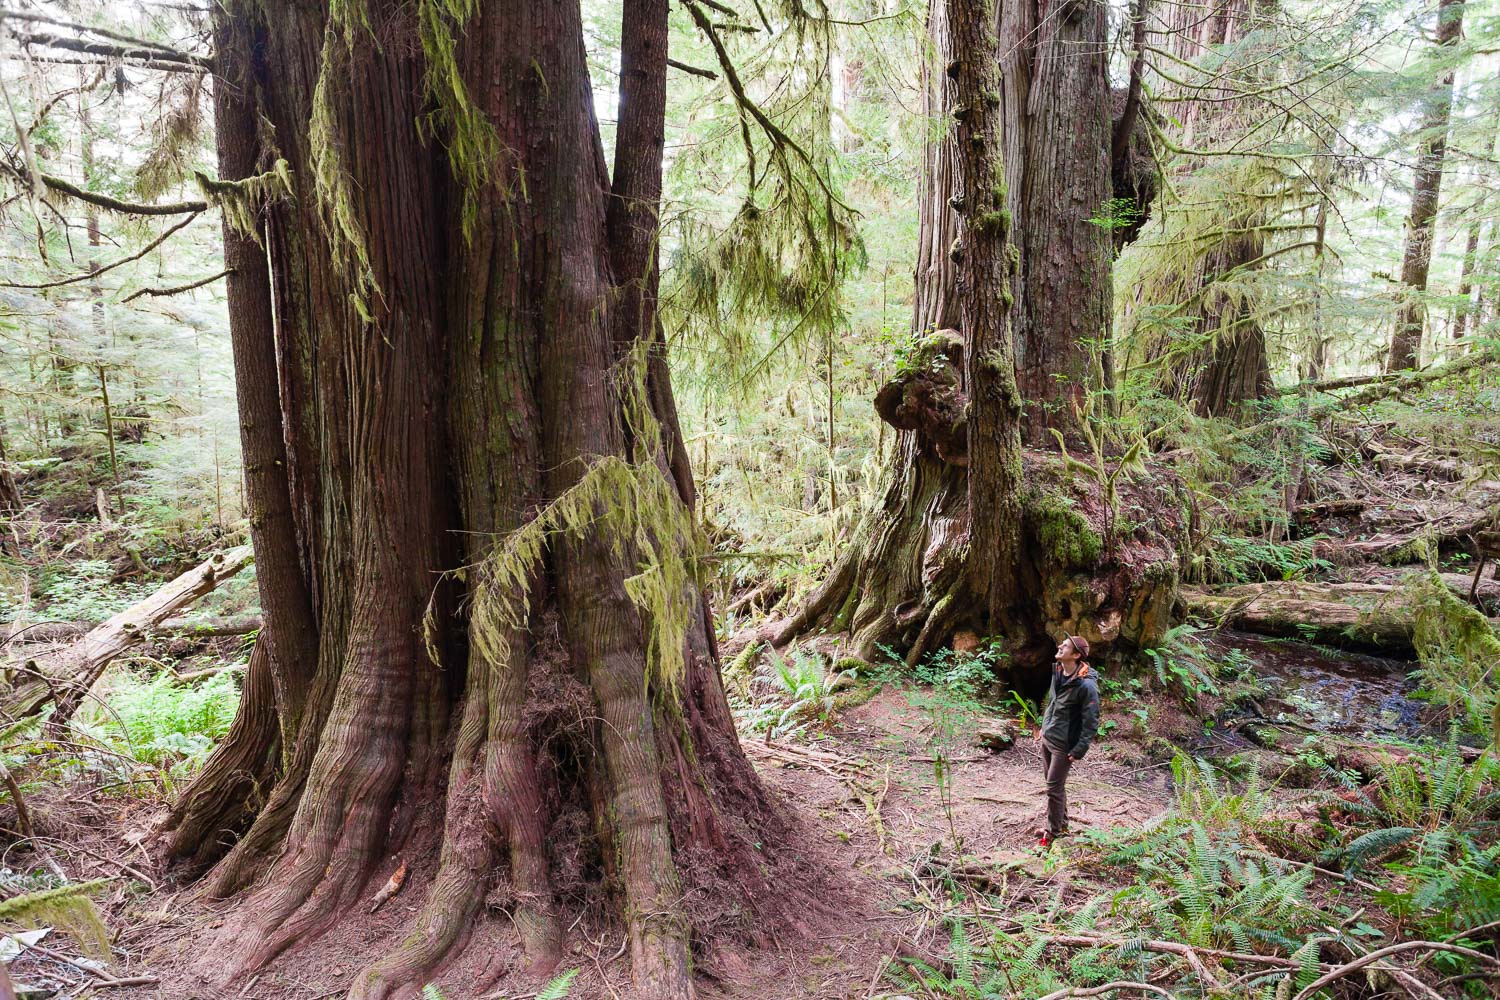 Along the path leading to the Red Creek Fir you will find this amazing group of ancient redcedars, aptly nicknamed " The 3 Guardians"